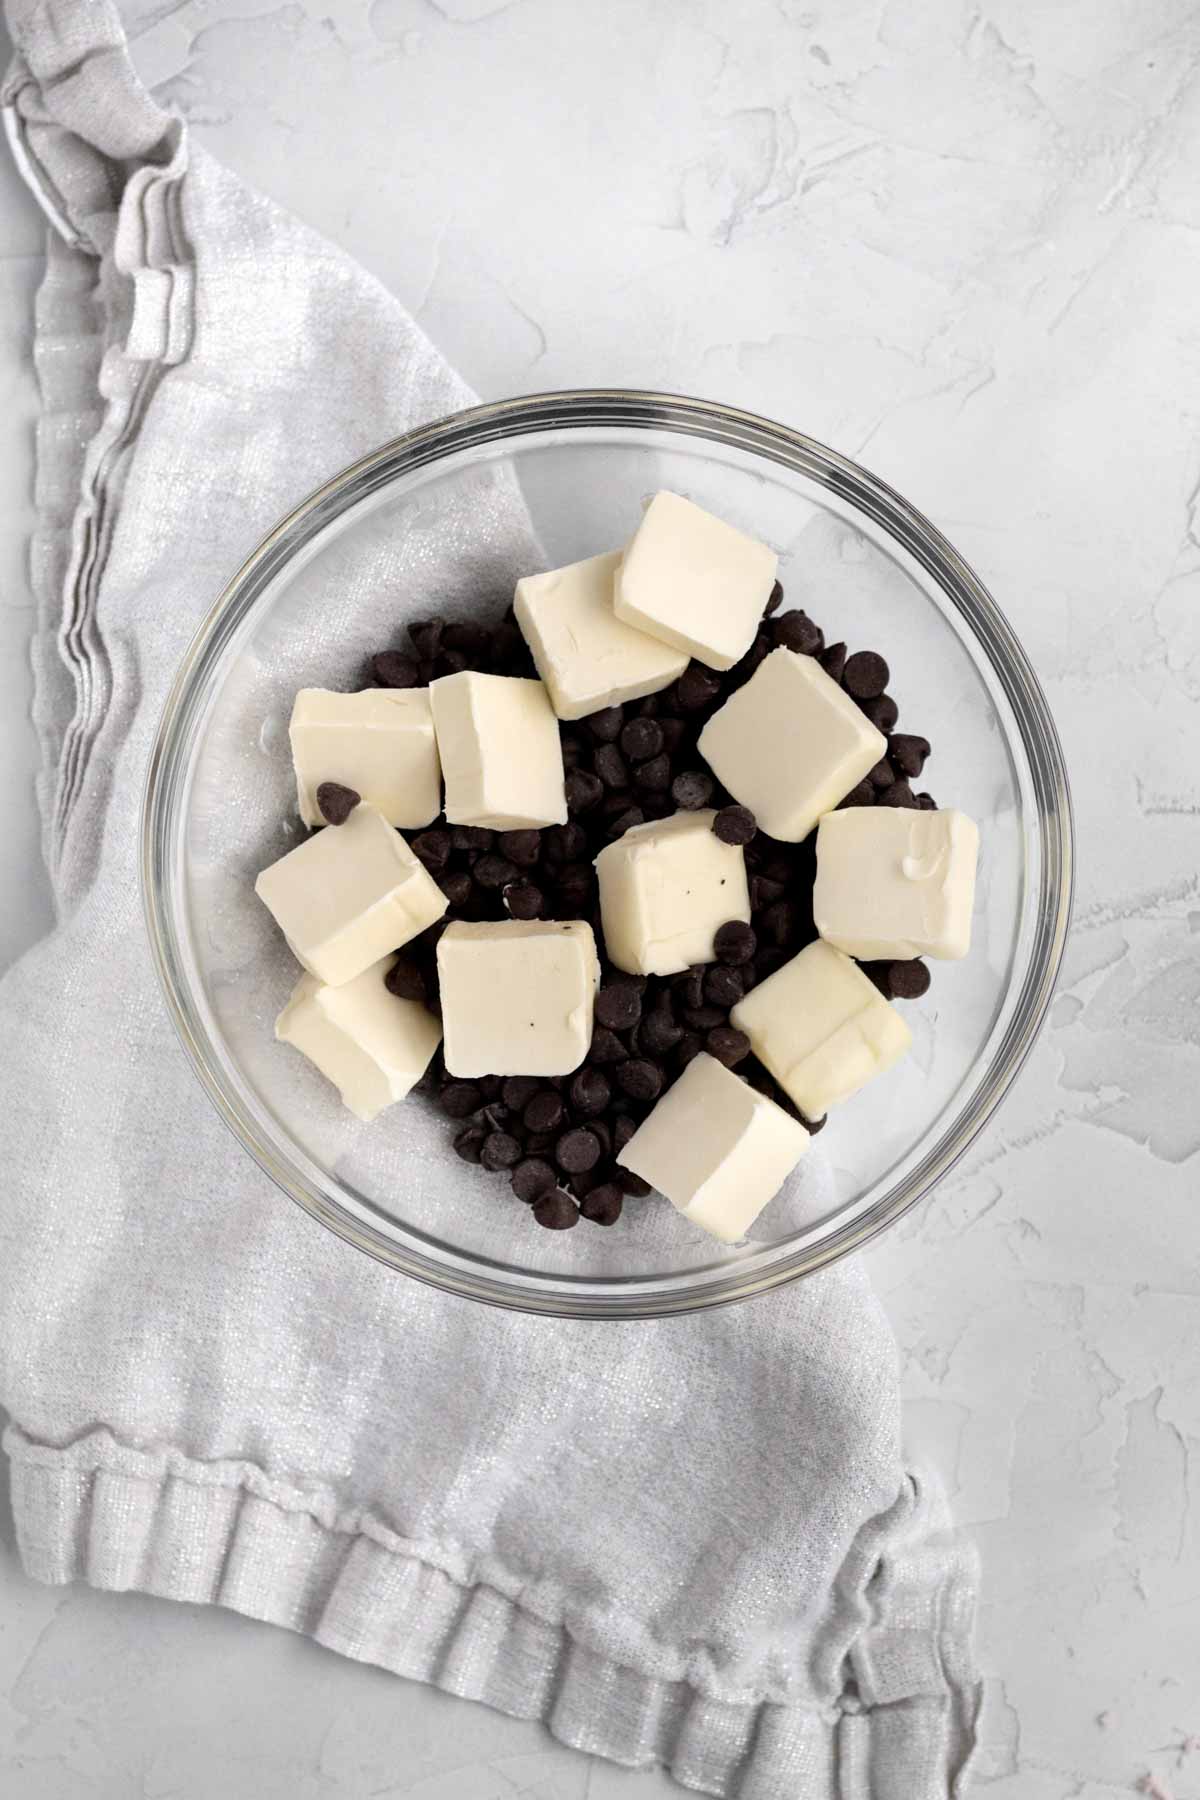 Chocolate and butter cubes in a bowl.